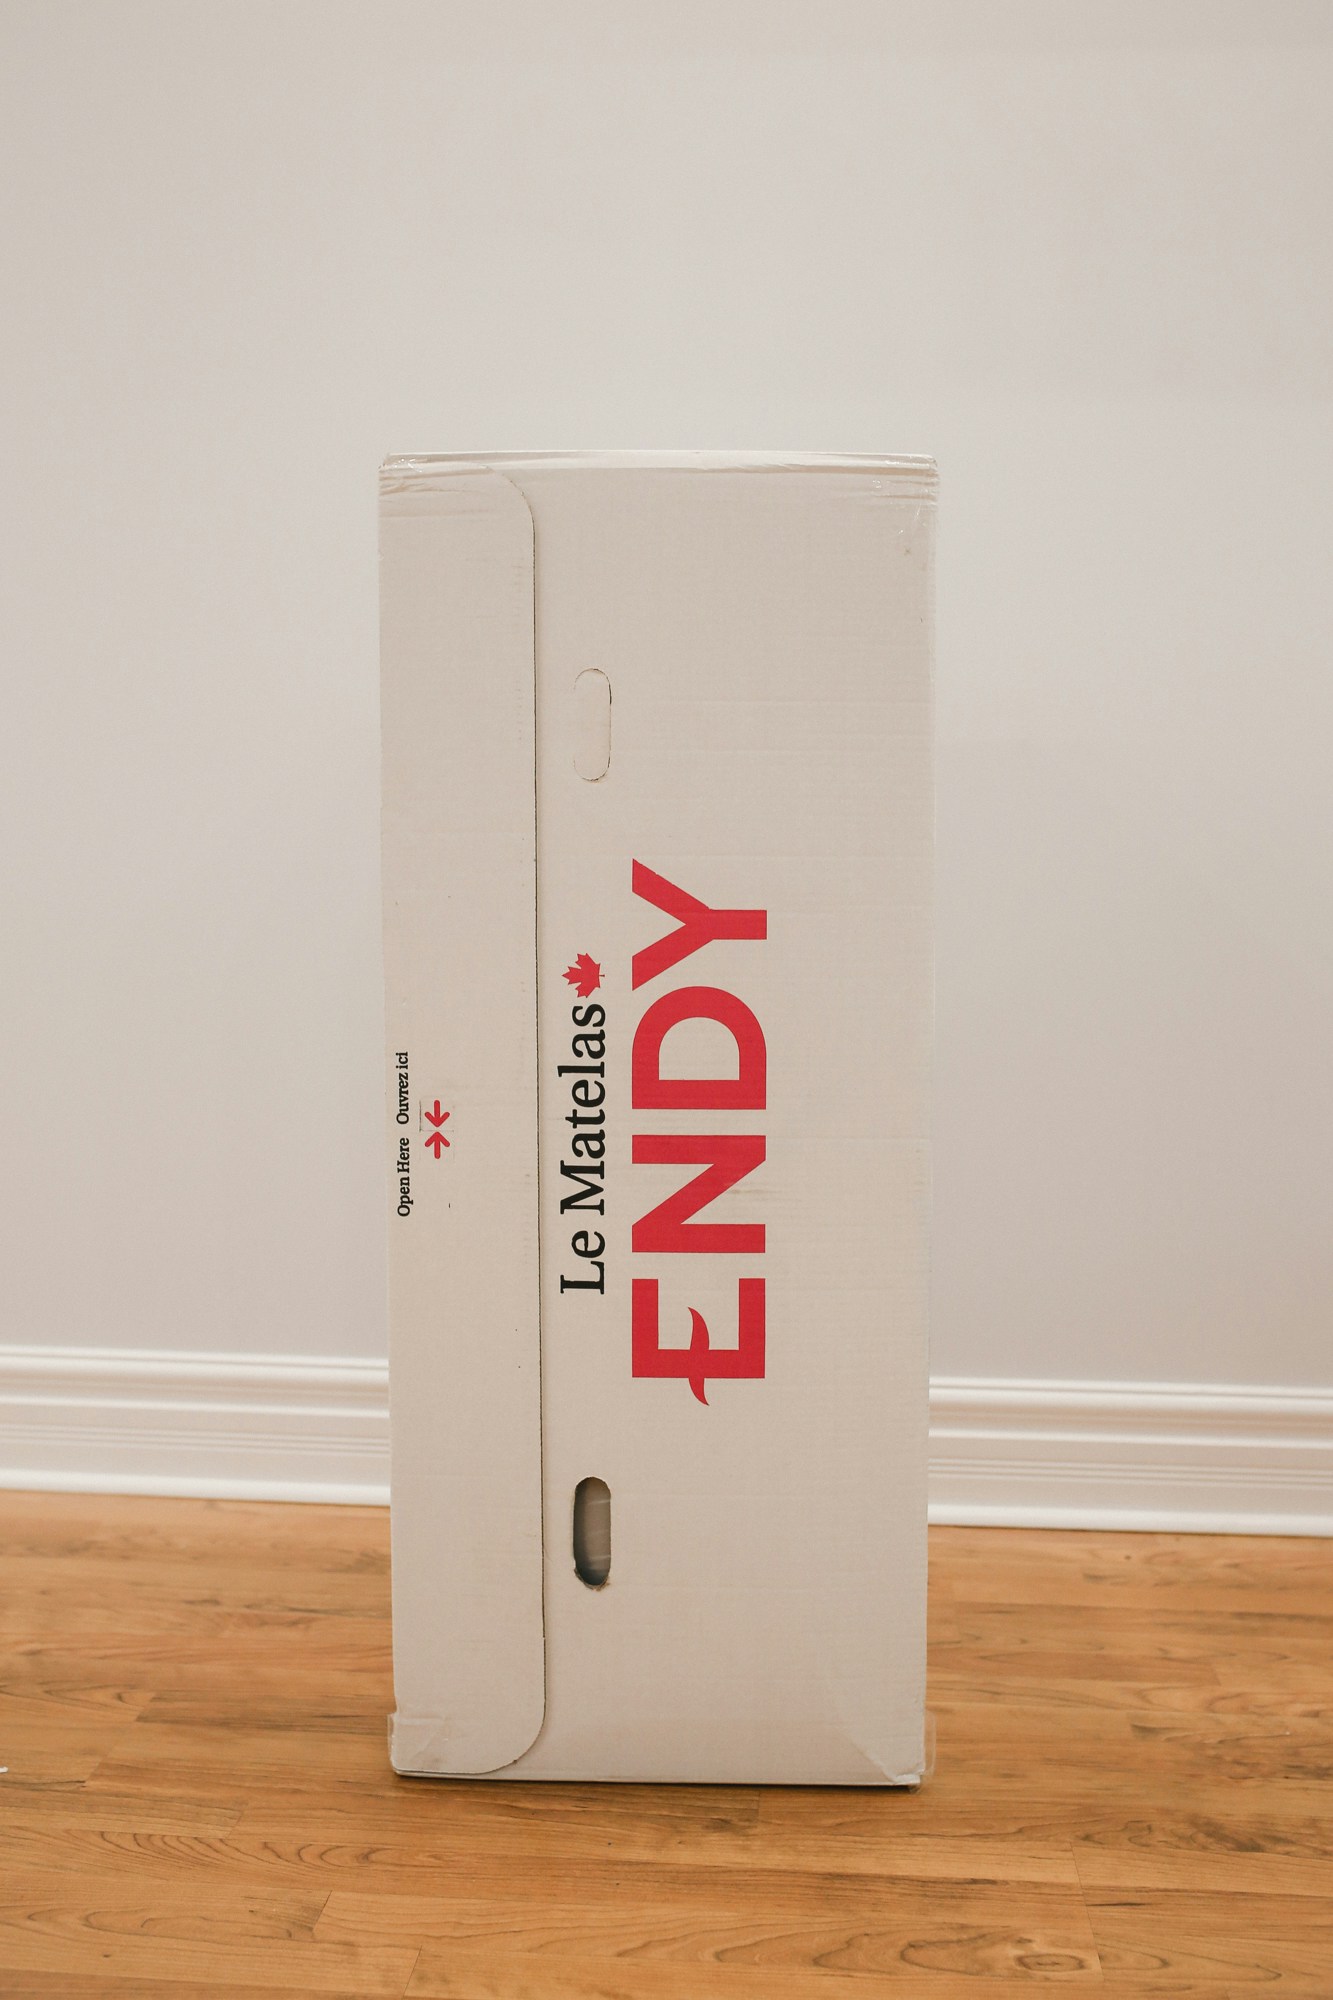 The Canadian Endy mattress comes shipped in a convenient box!